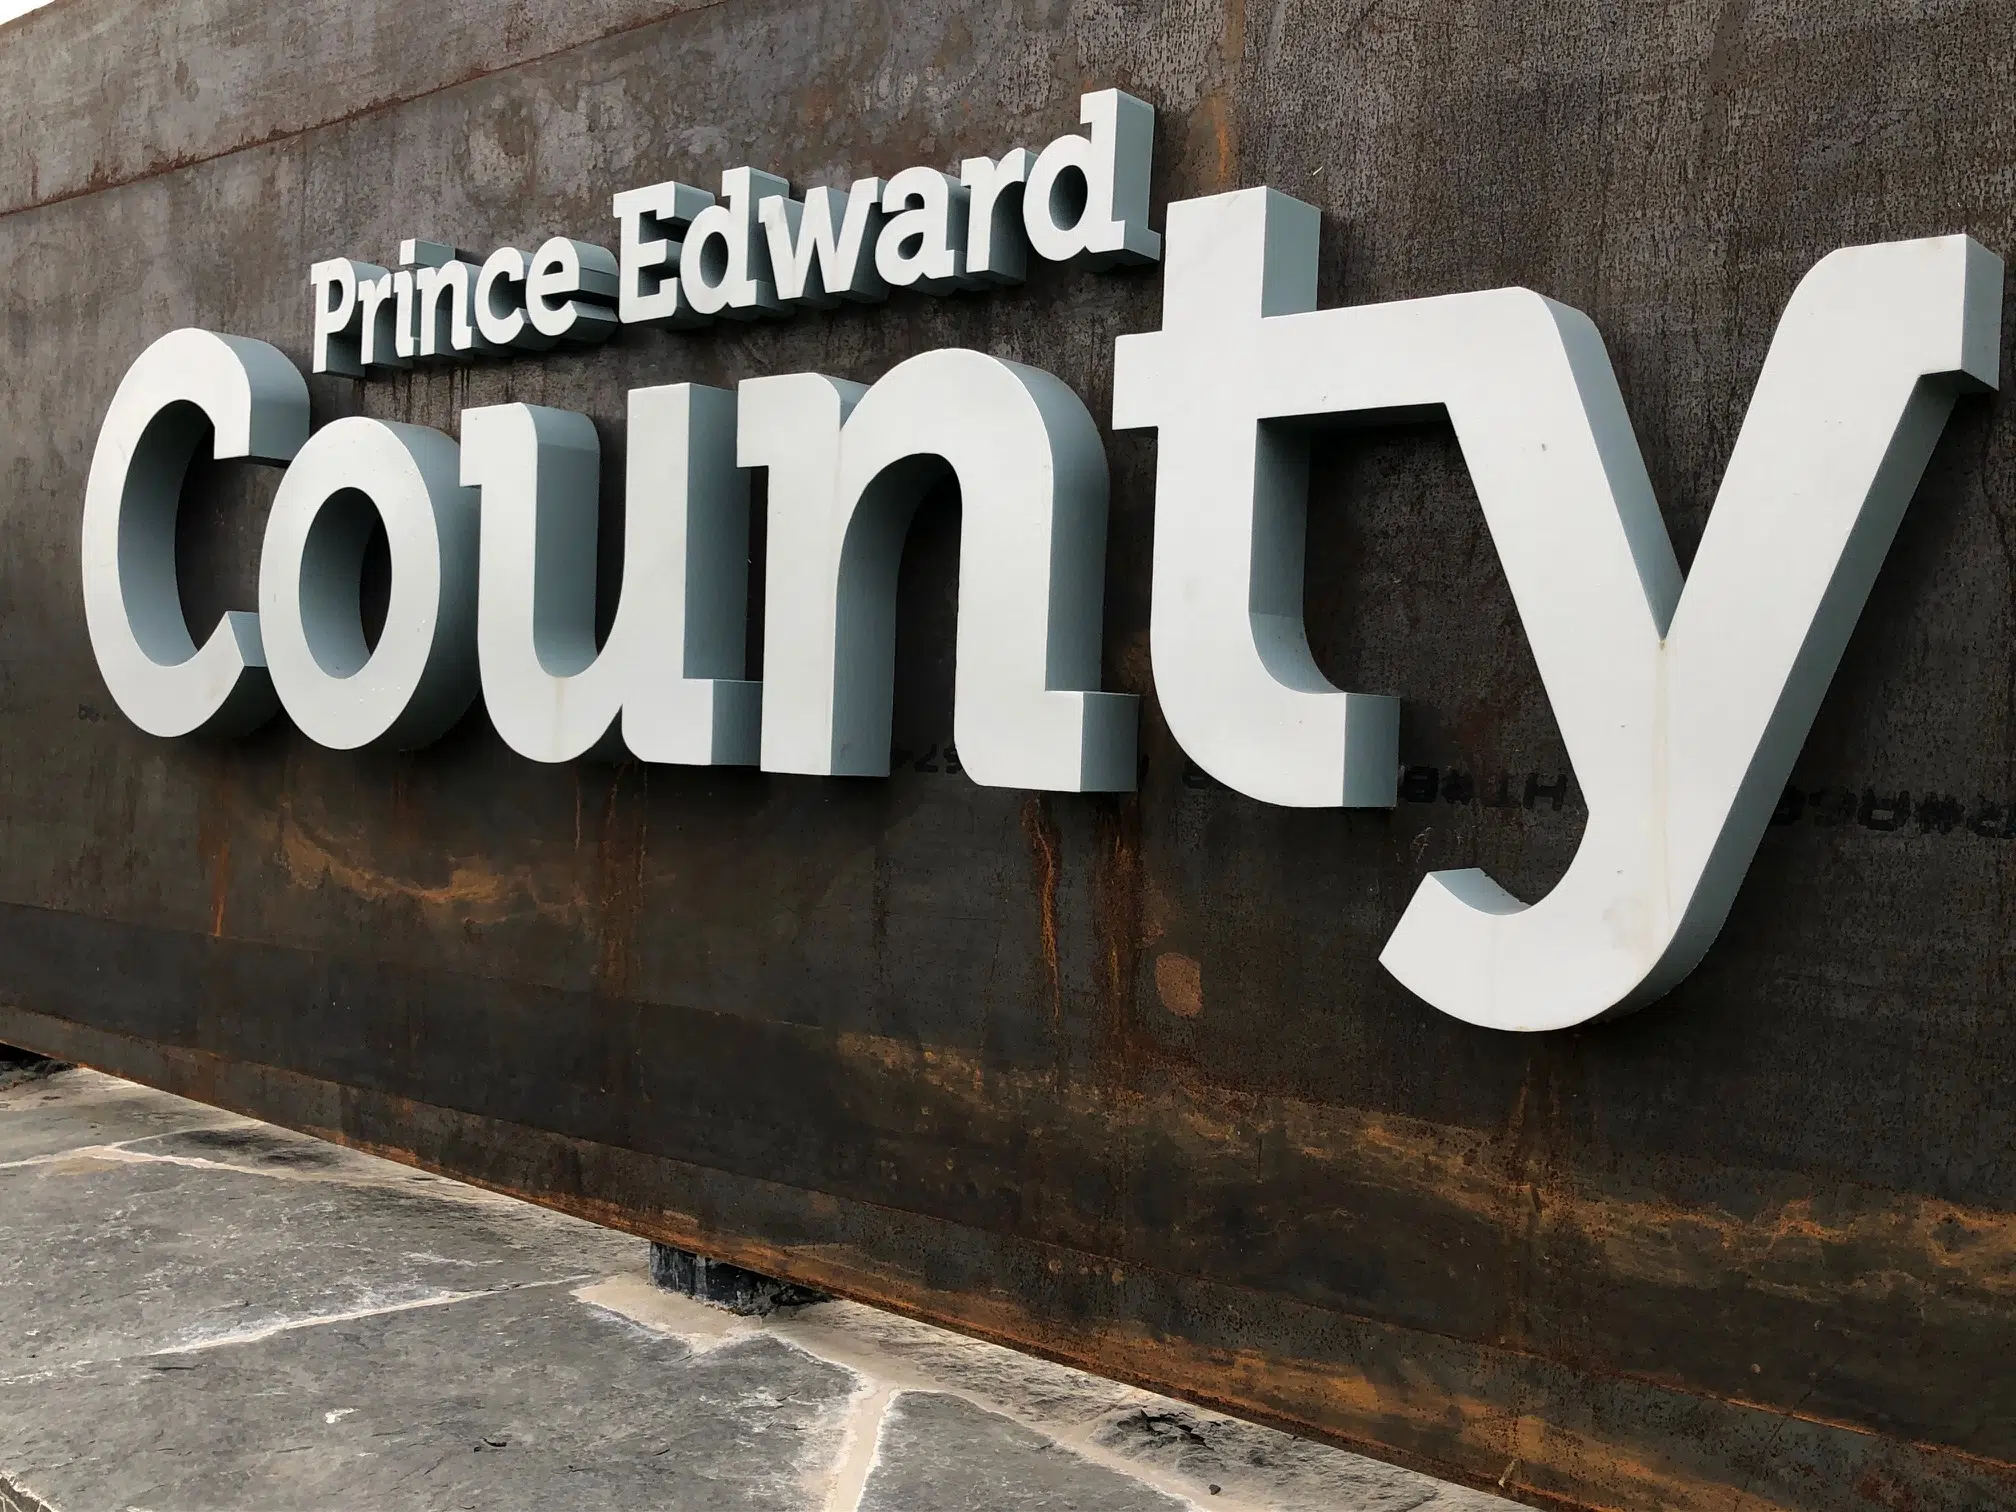 Prince Edward County council to consider terms for bulk water agreement with City of Belleville